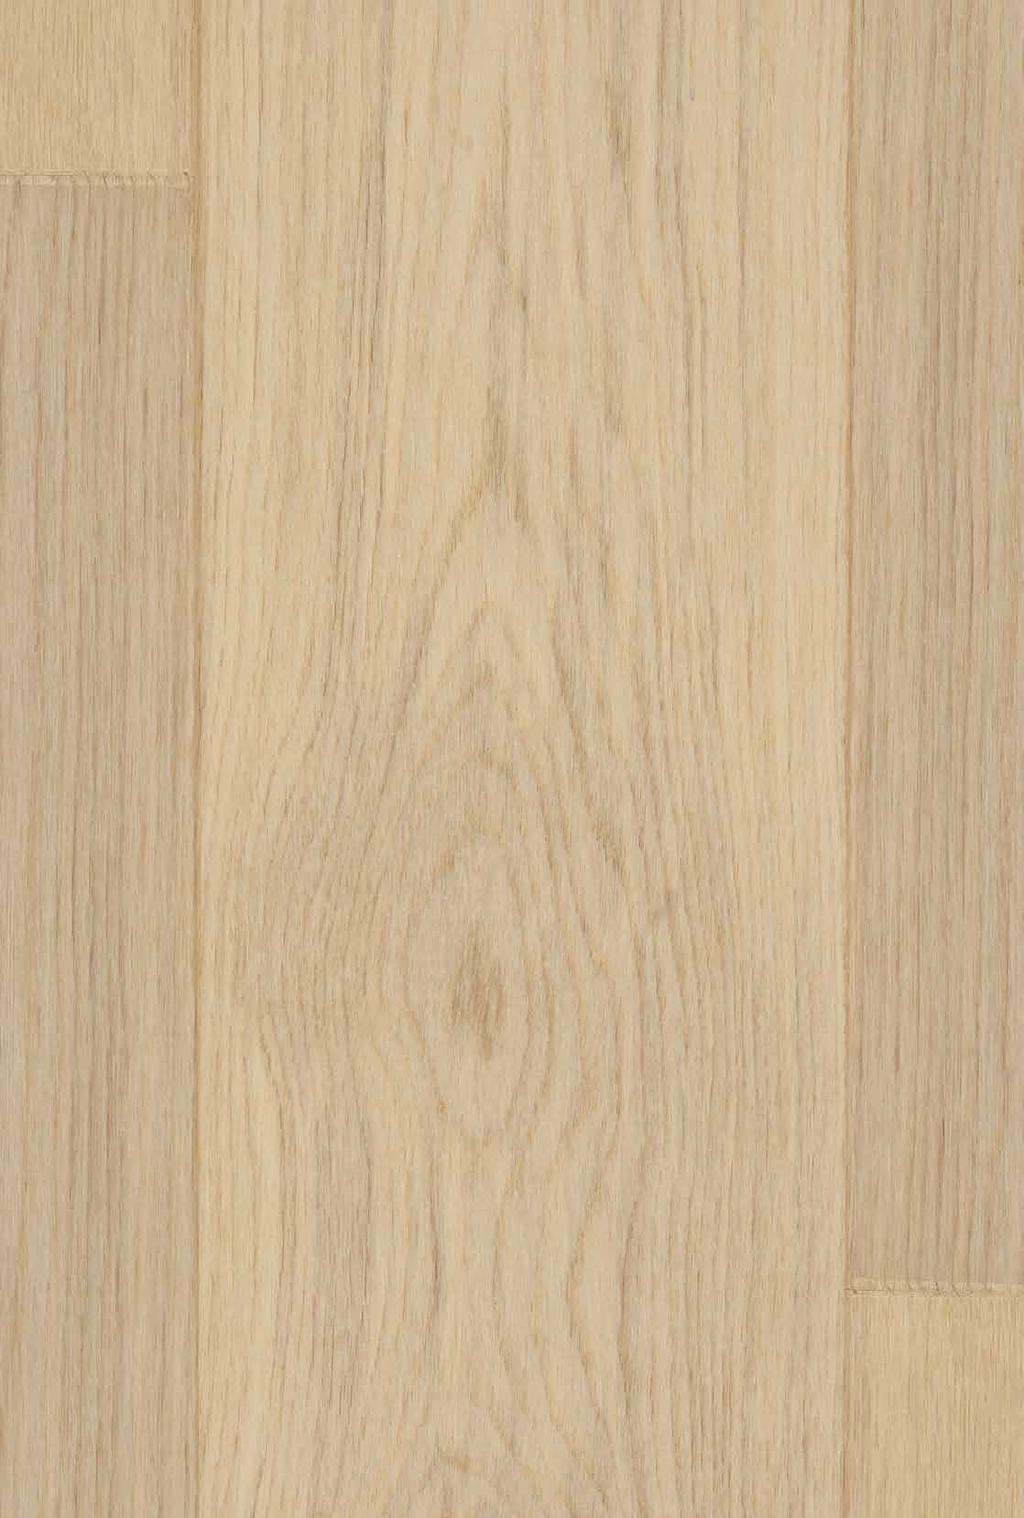 16 Unique Prefinished Hardwood Flooring Beveled Edges 2022 free download prefinished hardwood flooring beveled edges of wood flooring collection pdf in please refer to pages 6 7 for icon key engineered 38